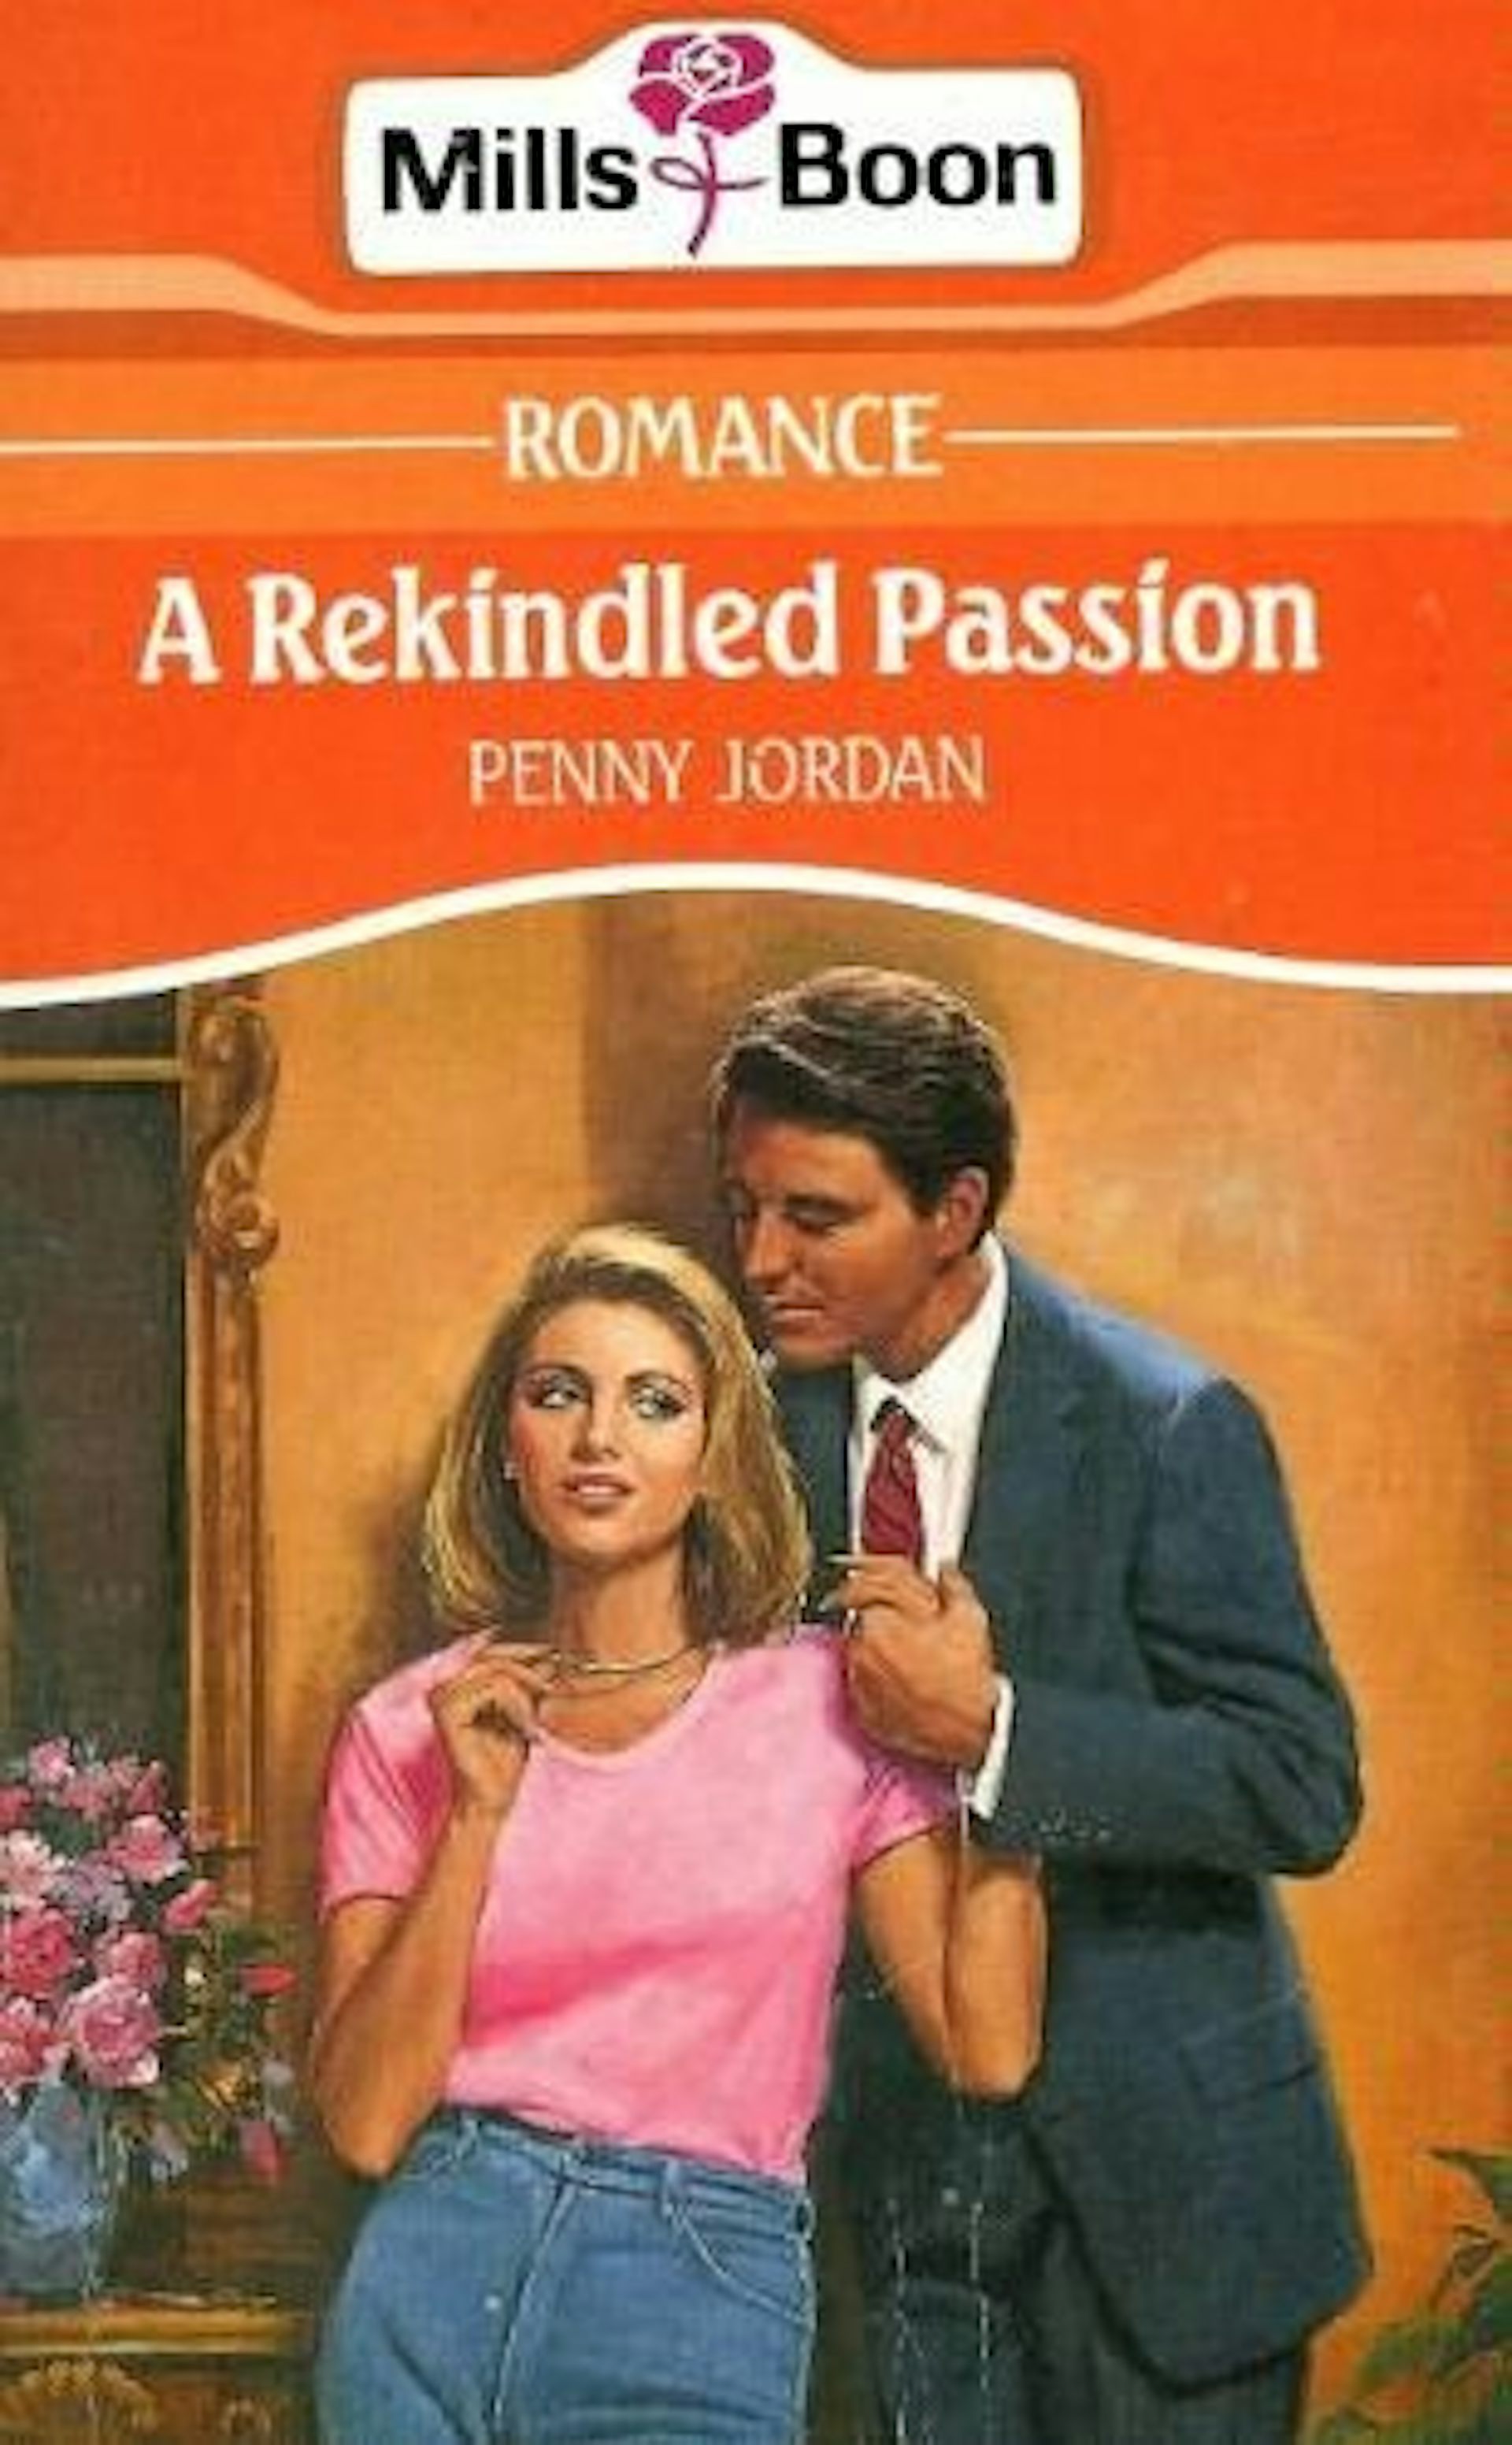 mills and boon romance novels free download pdf